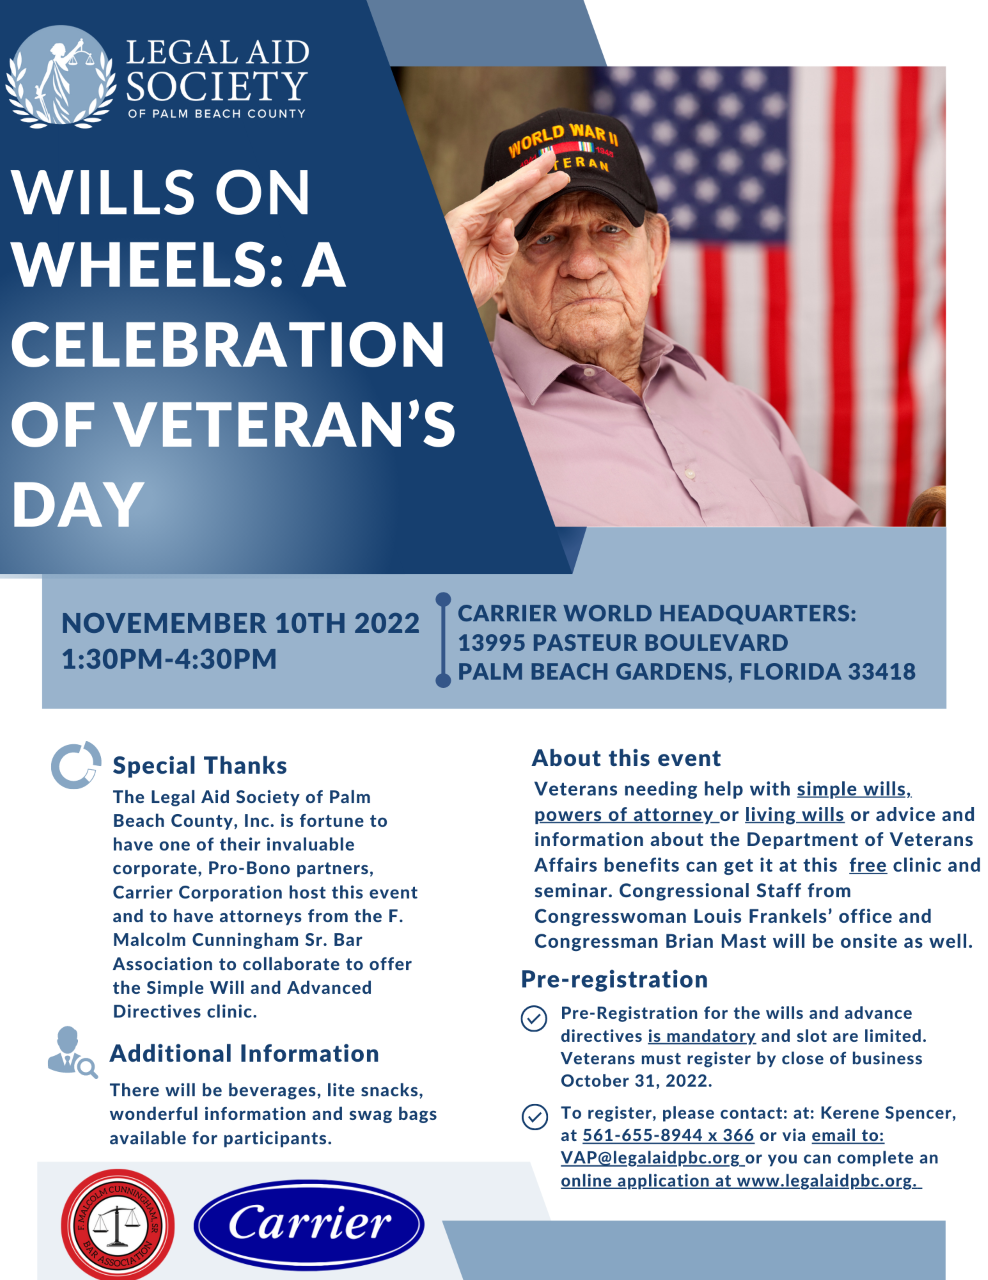 WILLS ON WHEELS: A CELEBRATION OF VETERAN'S DAY NOVEMEMBER 10TH 2022 1:30PM-4:30PM CARRIER WORLD HEADQUARTERS: 13995 PASTEUR BOULEVARD • PALM BEACH GARDENS, FLORIDA 33418